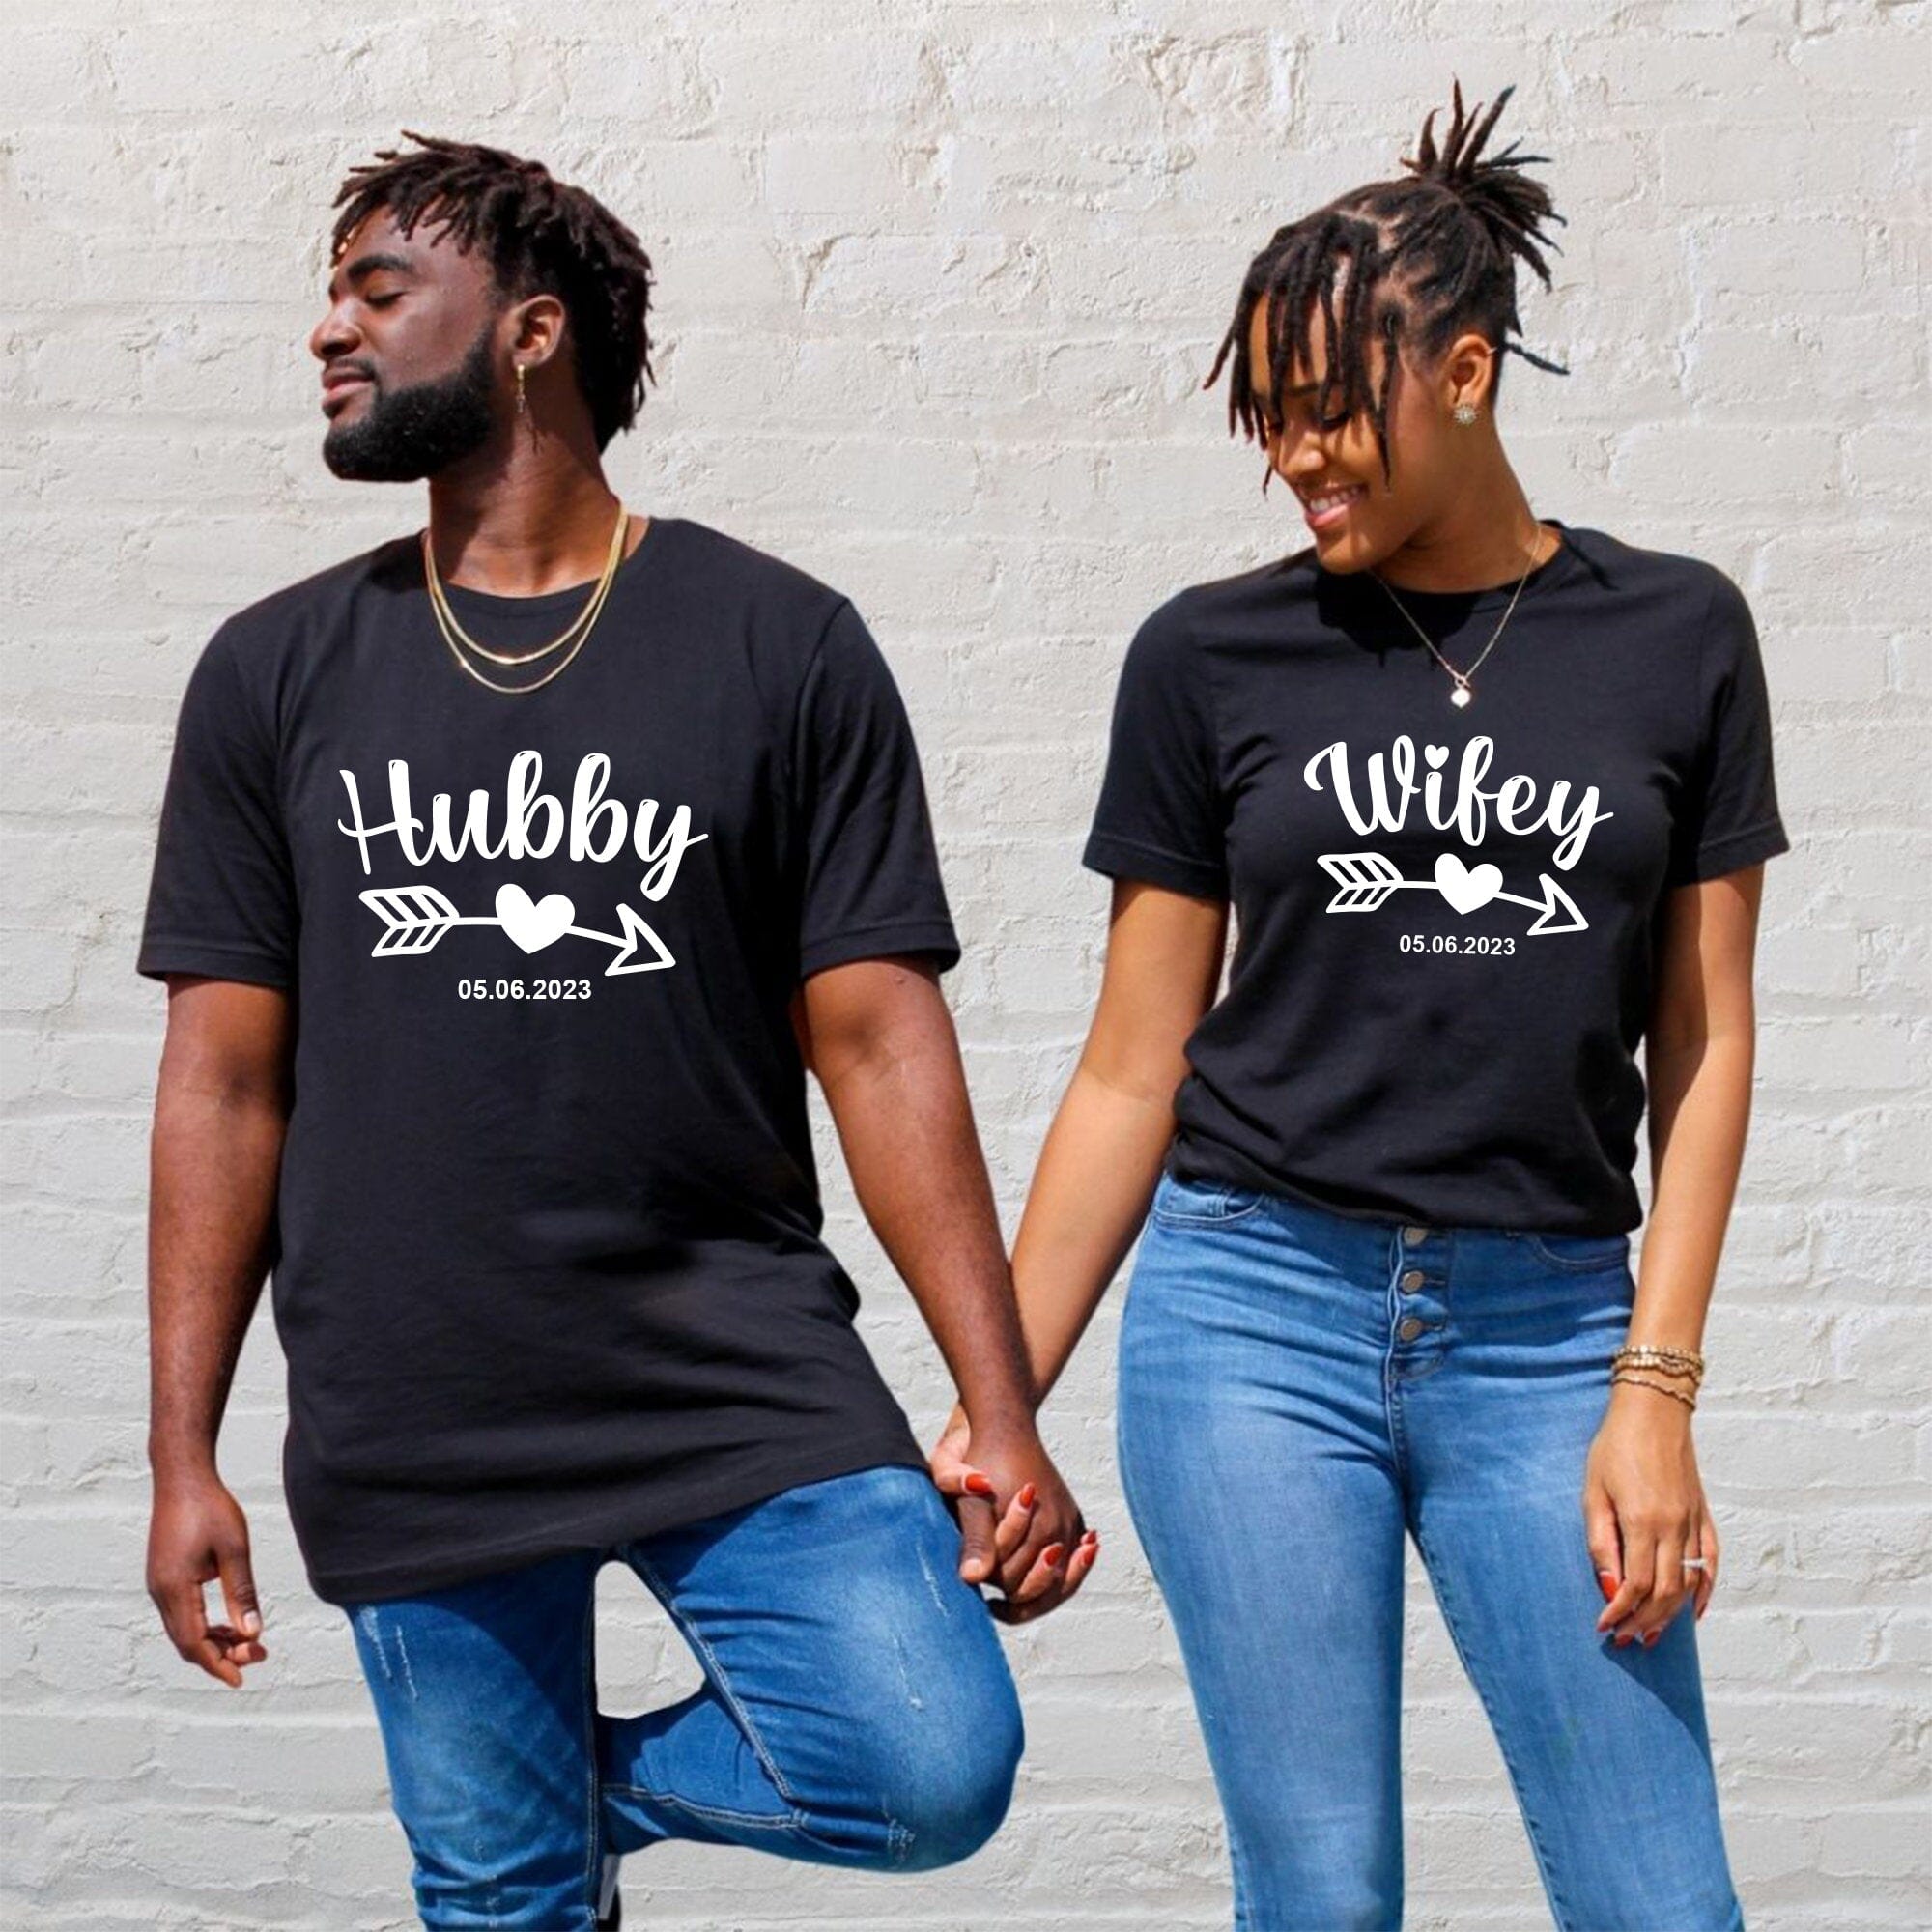 Personalised Wifey Hubby T-shirt with Wedding Date, Bride Groom Mr Mrs engagement gift